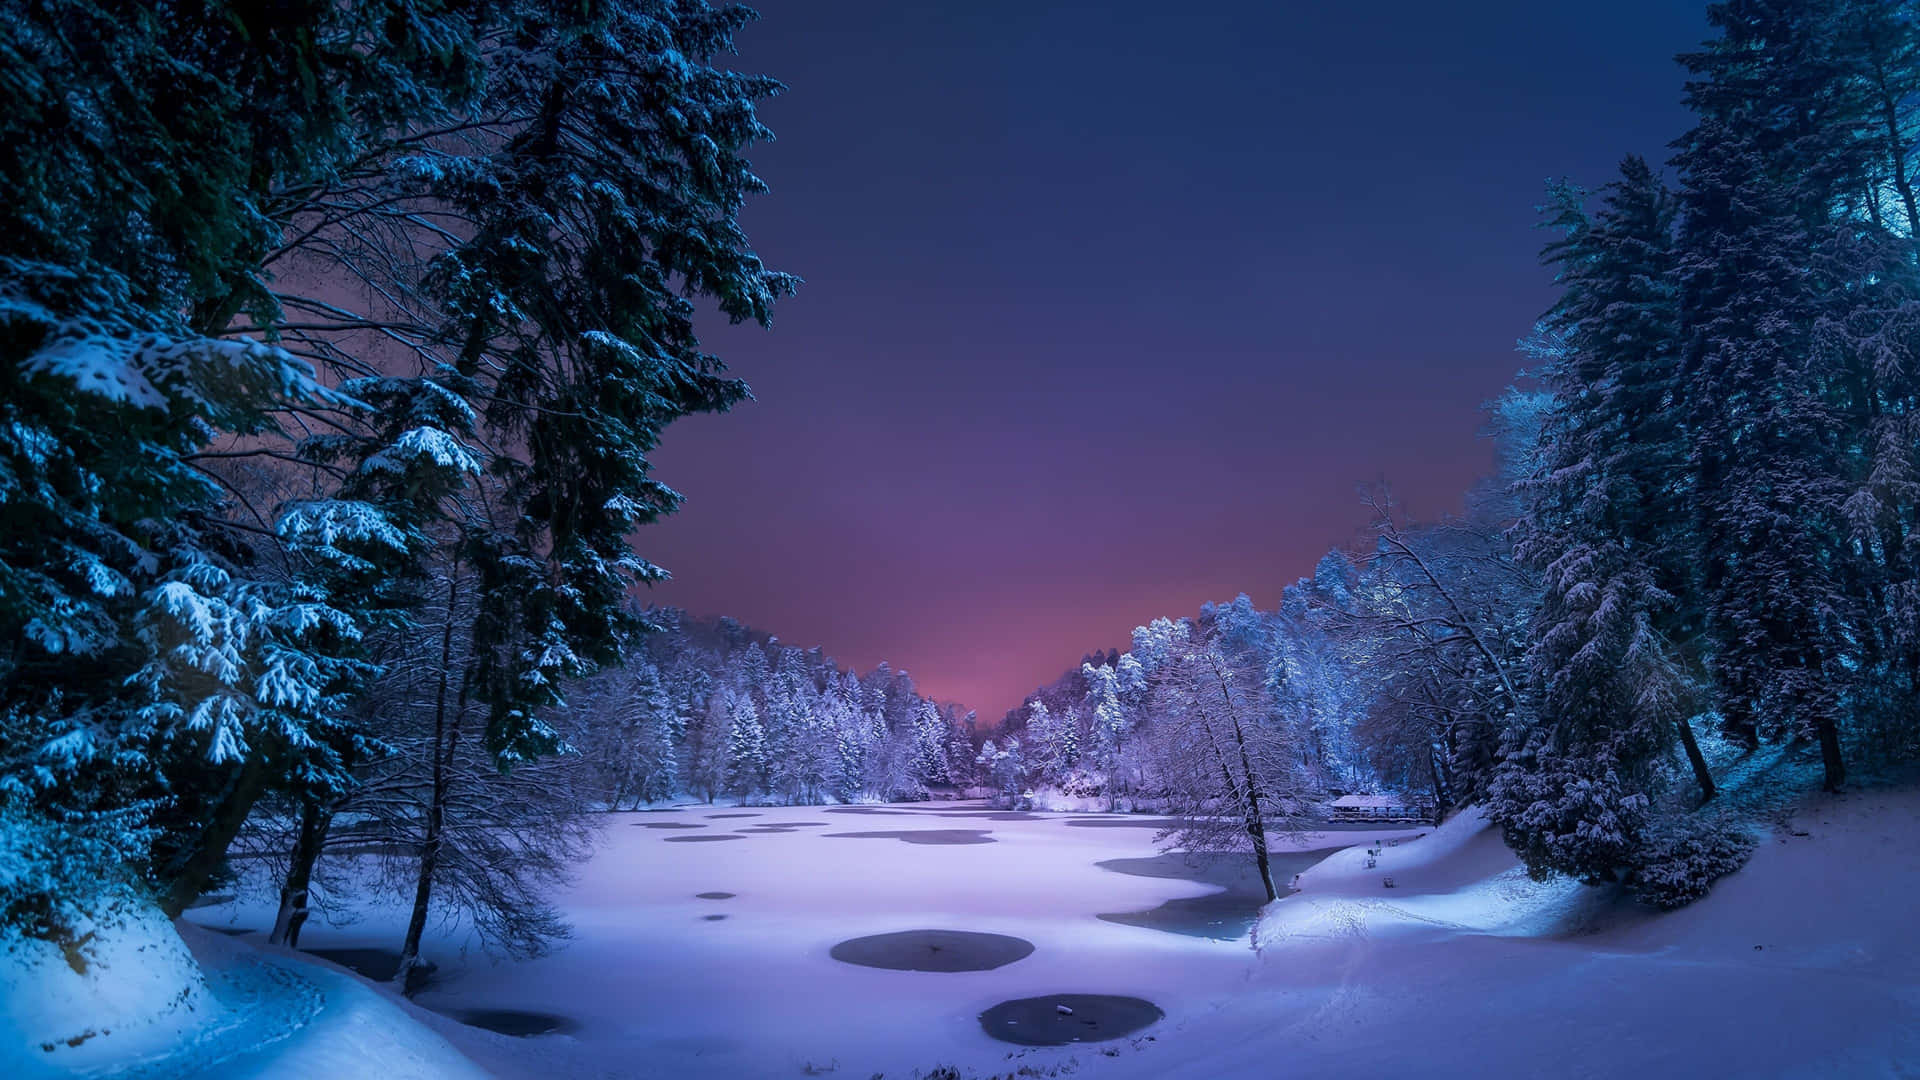 Explore the Magical Snowy Forest